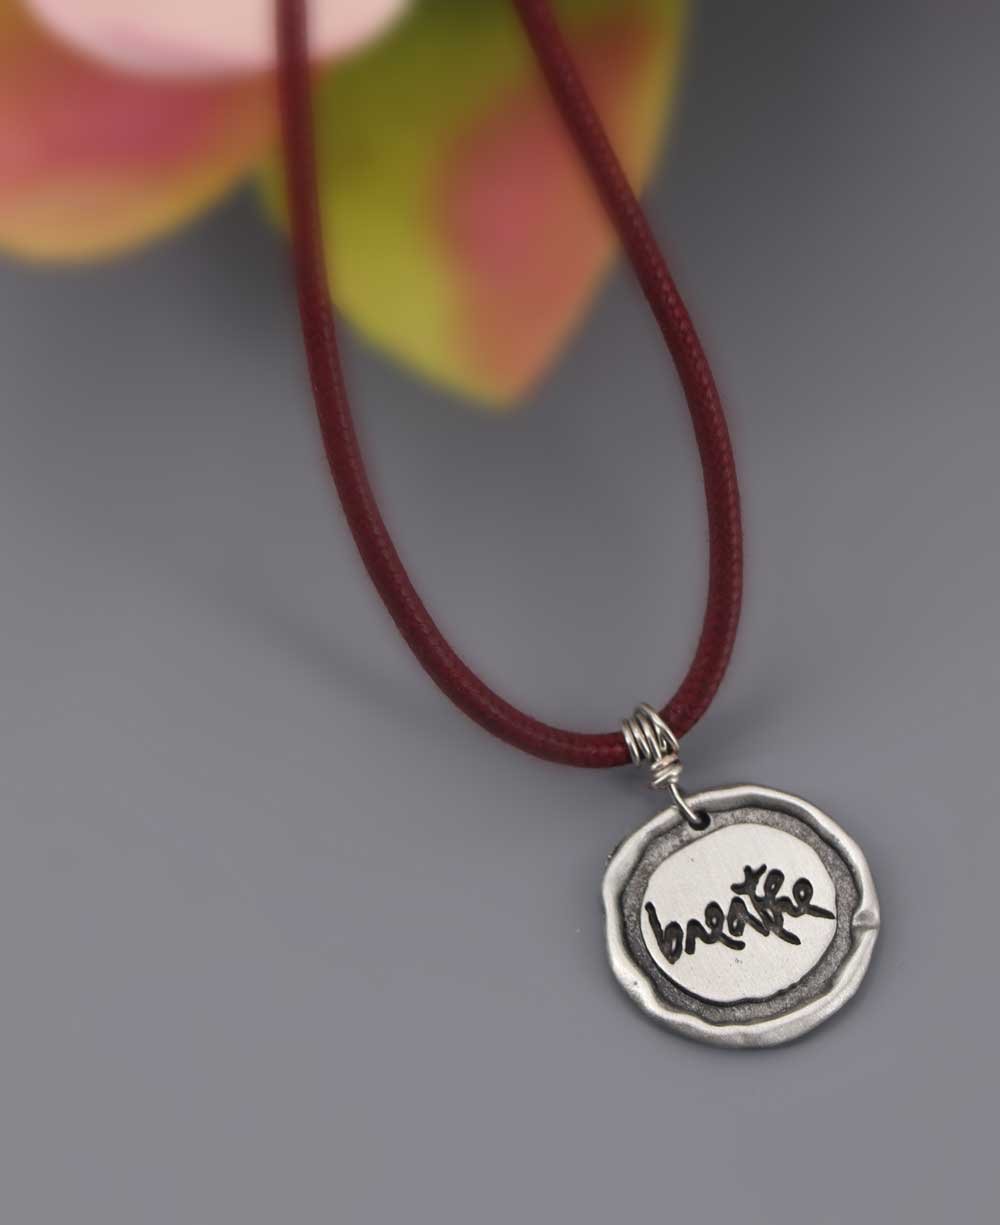 Thich Nhat Hanh Breathe Necklace - Necklaces